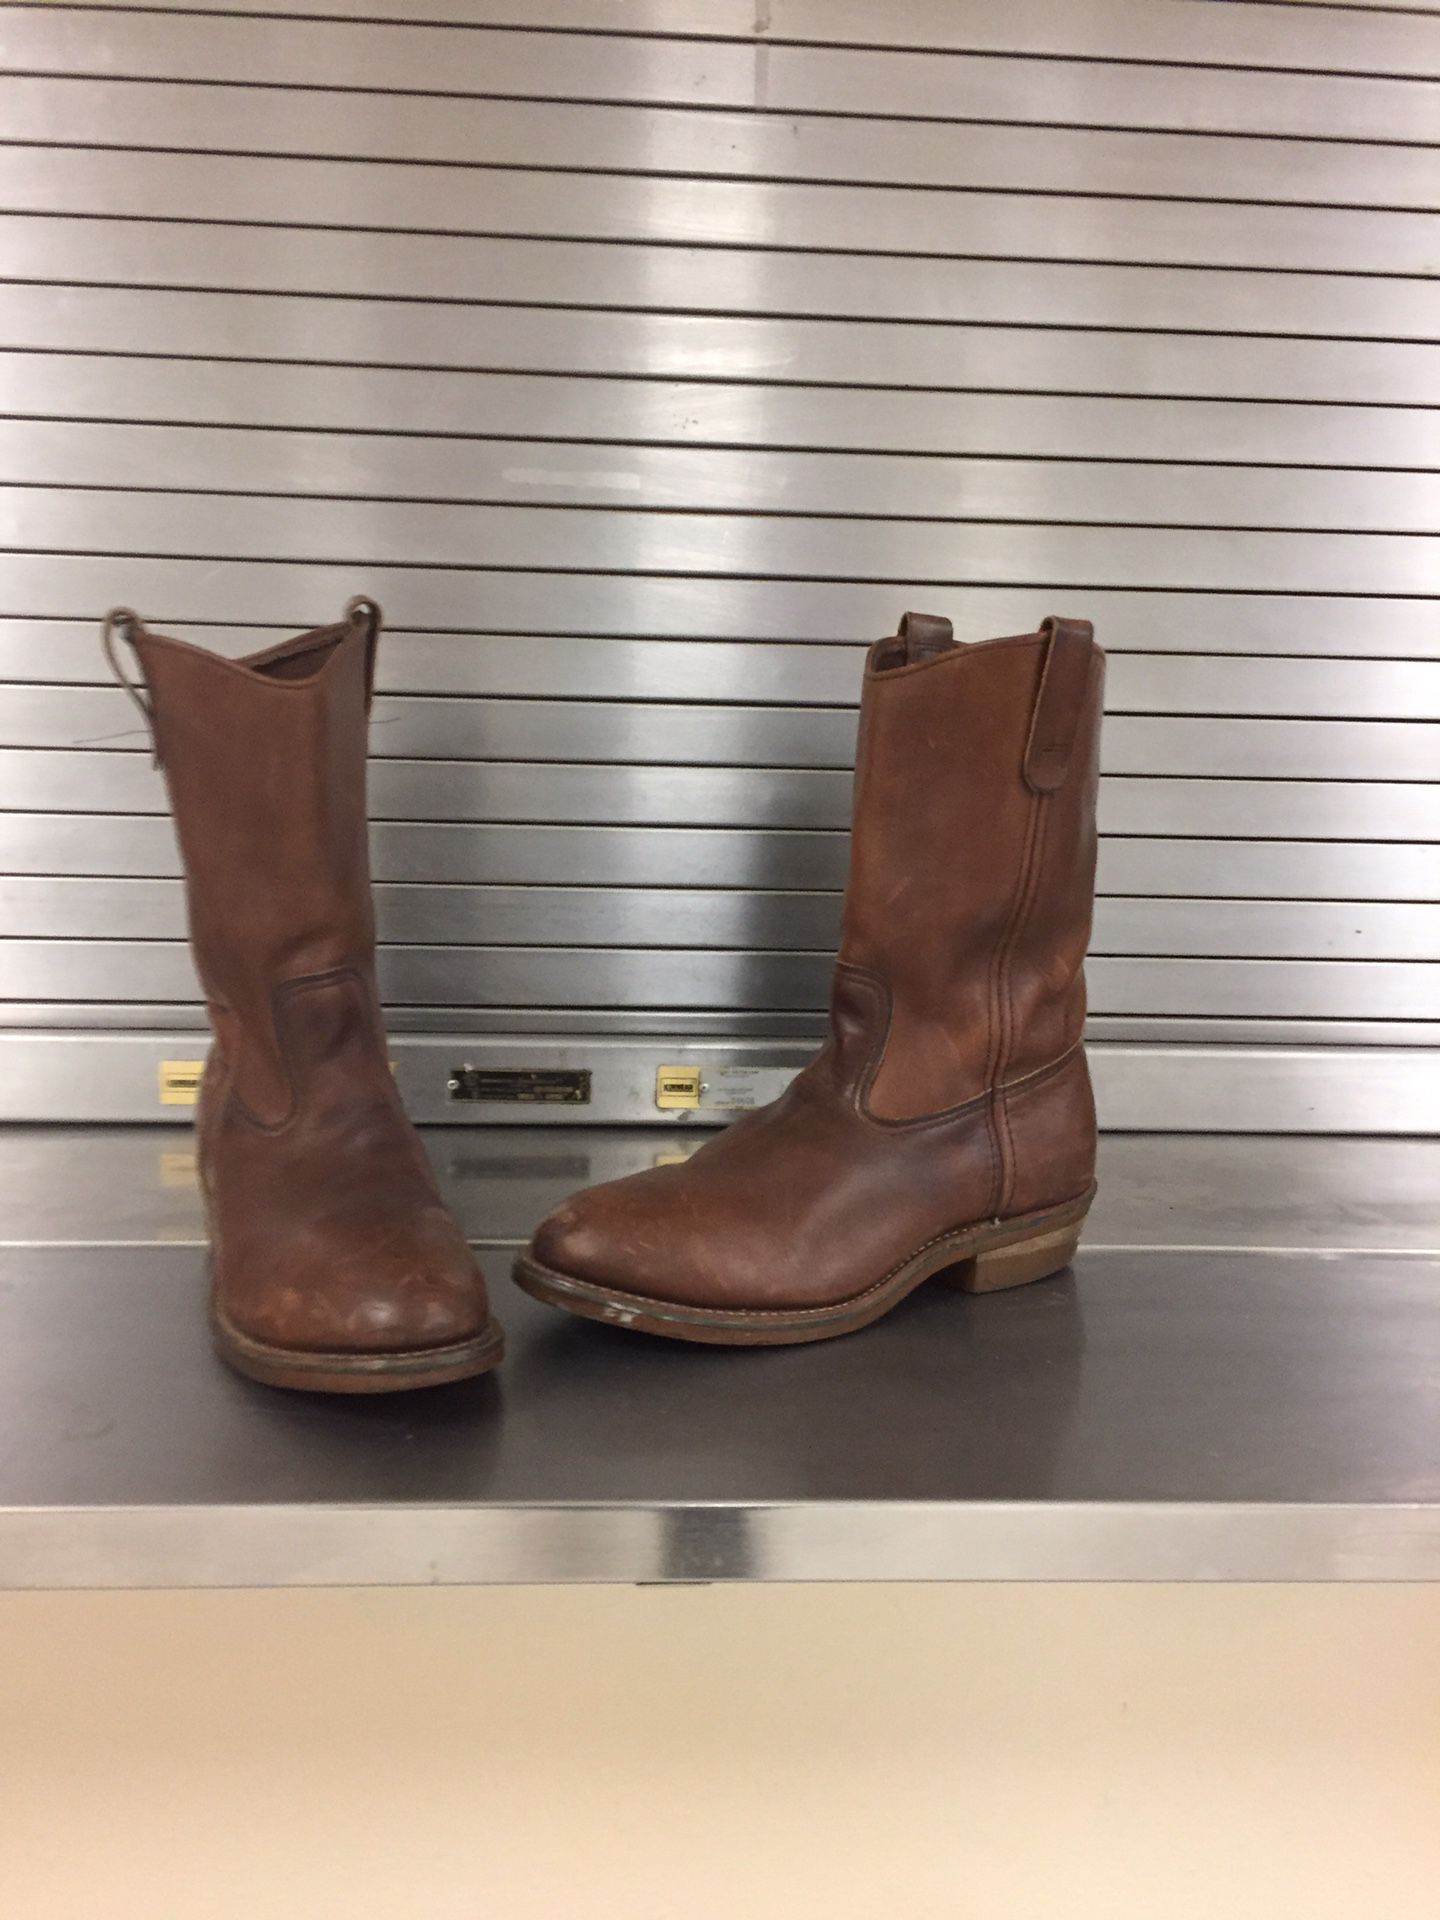 Redwing steal toe work Boots size 10 $100